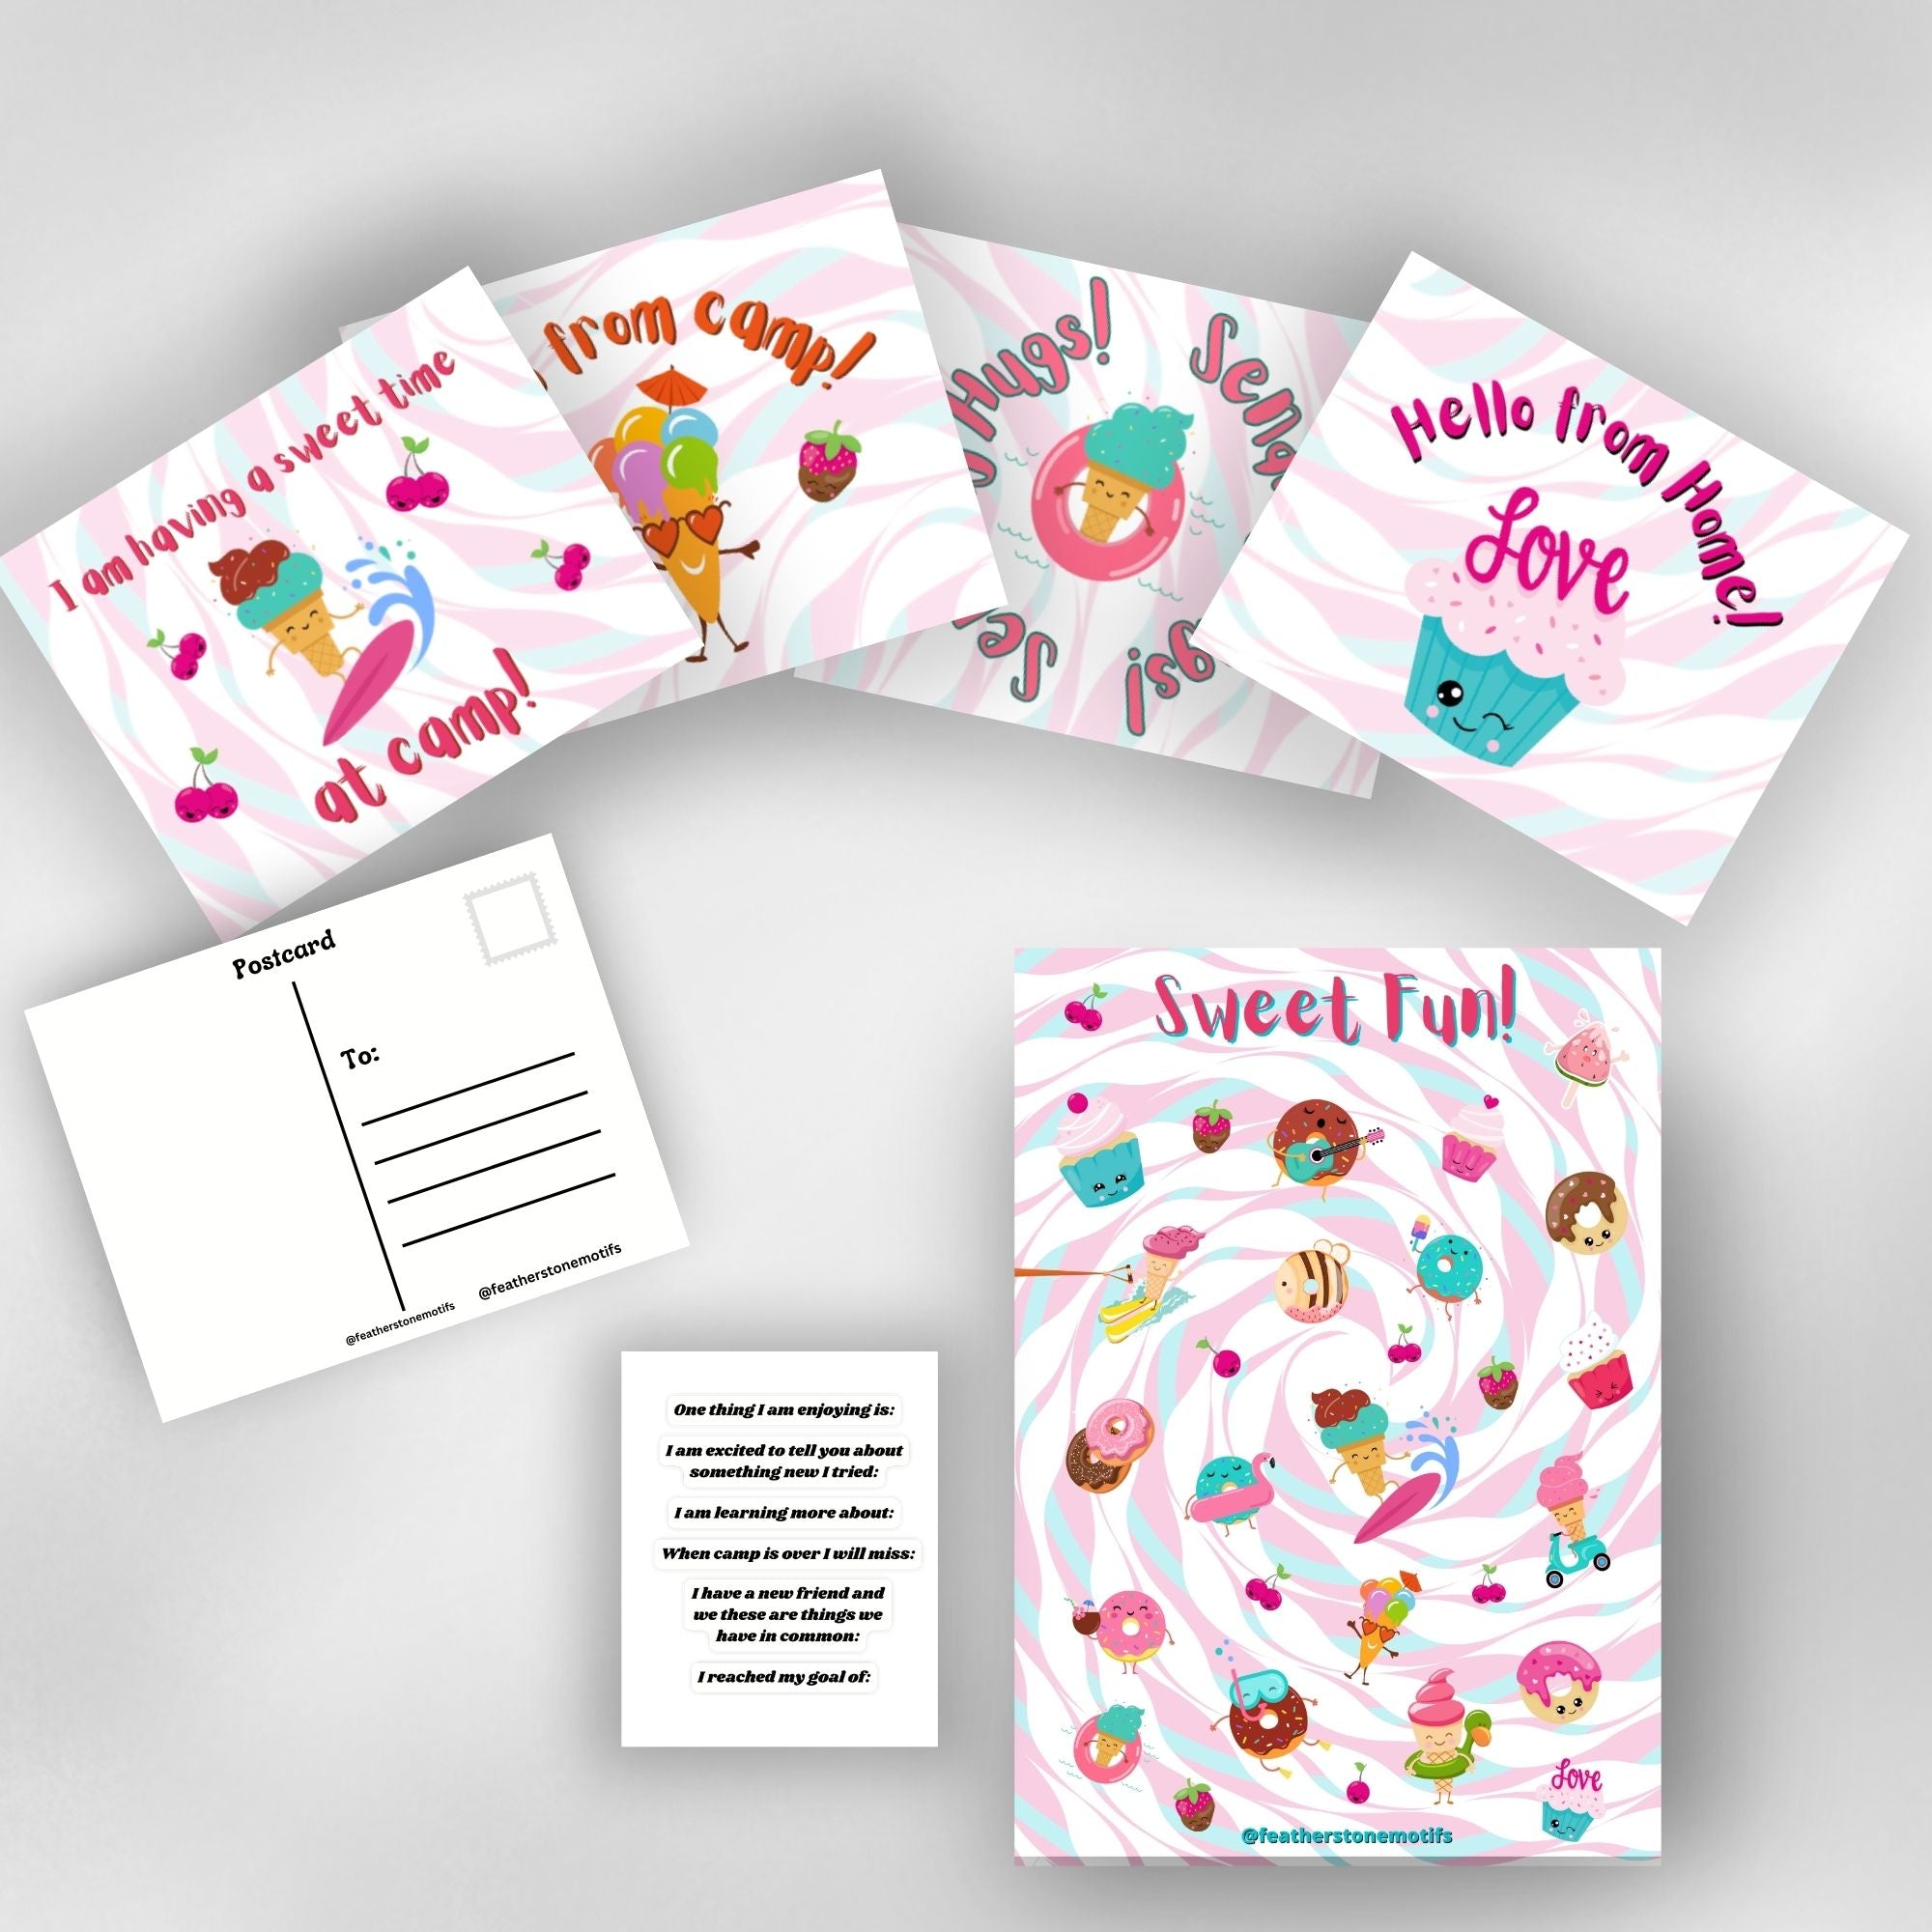 This image shows the full Sweet Fun! themed Camp Postcard Kit.